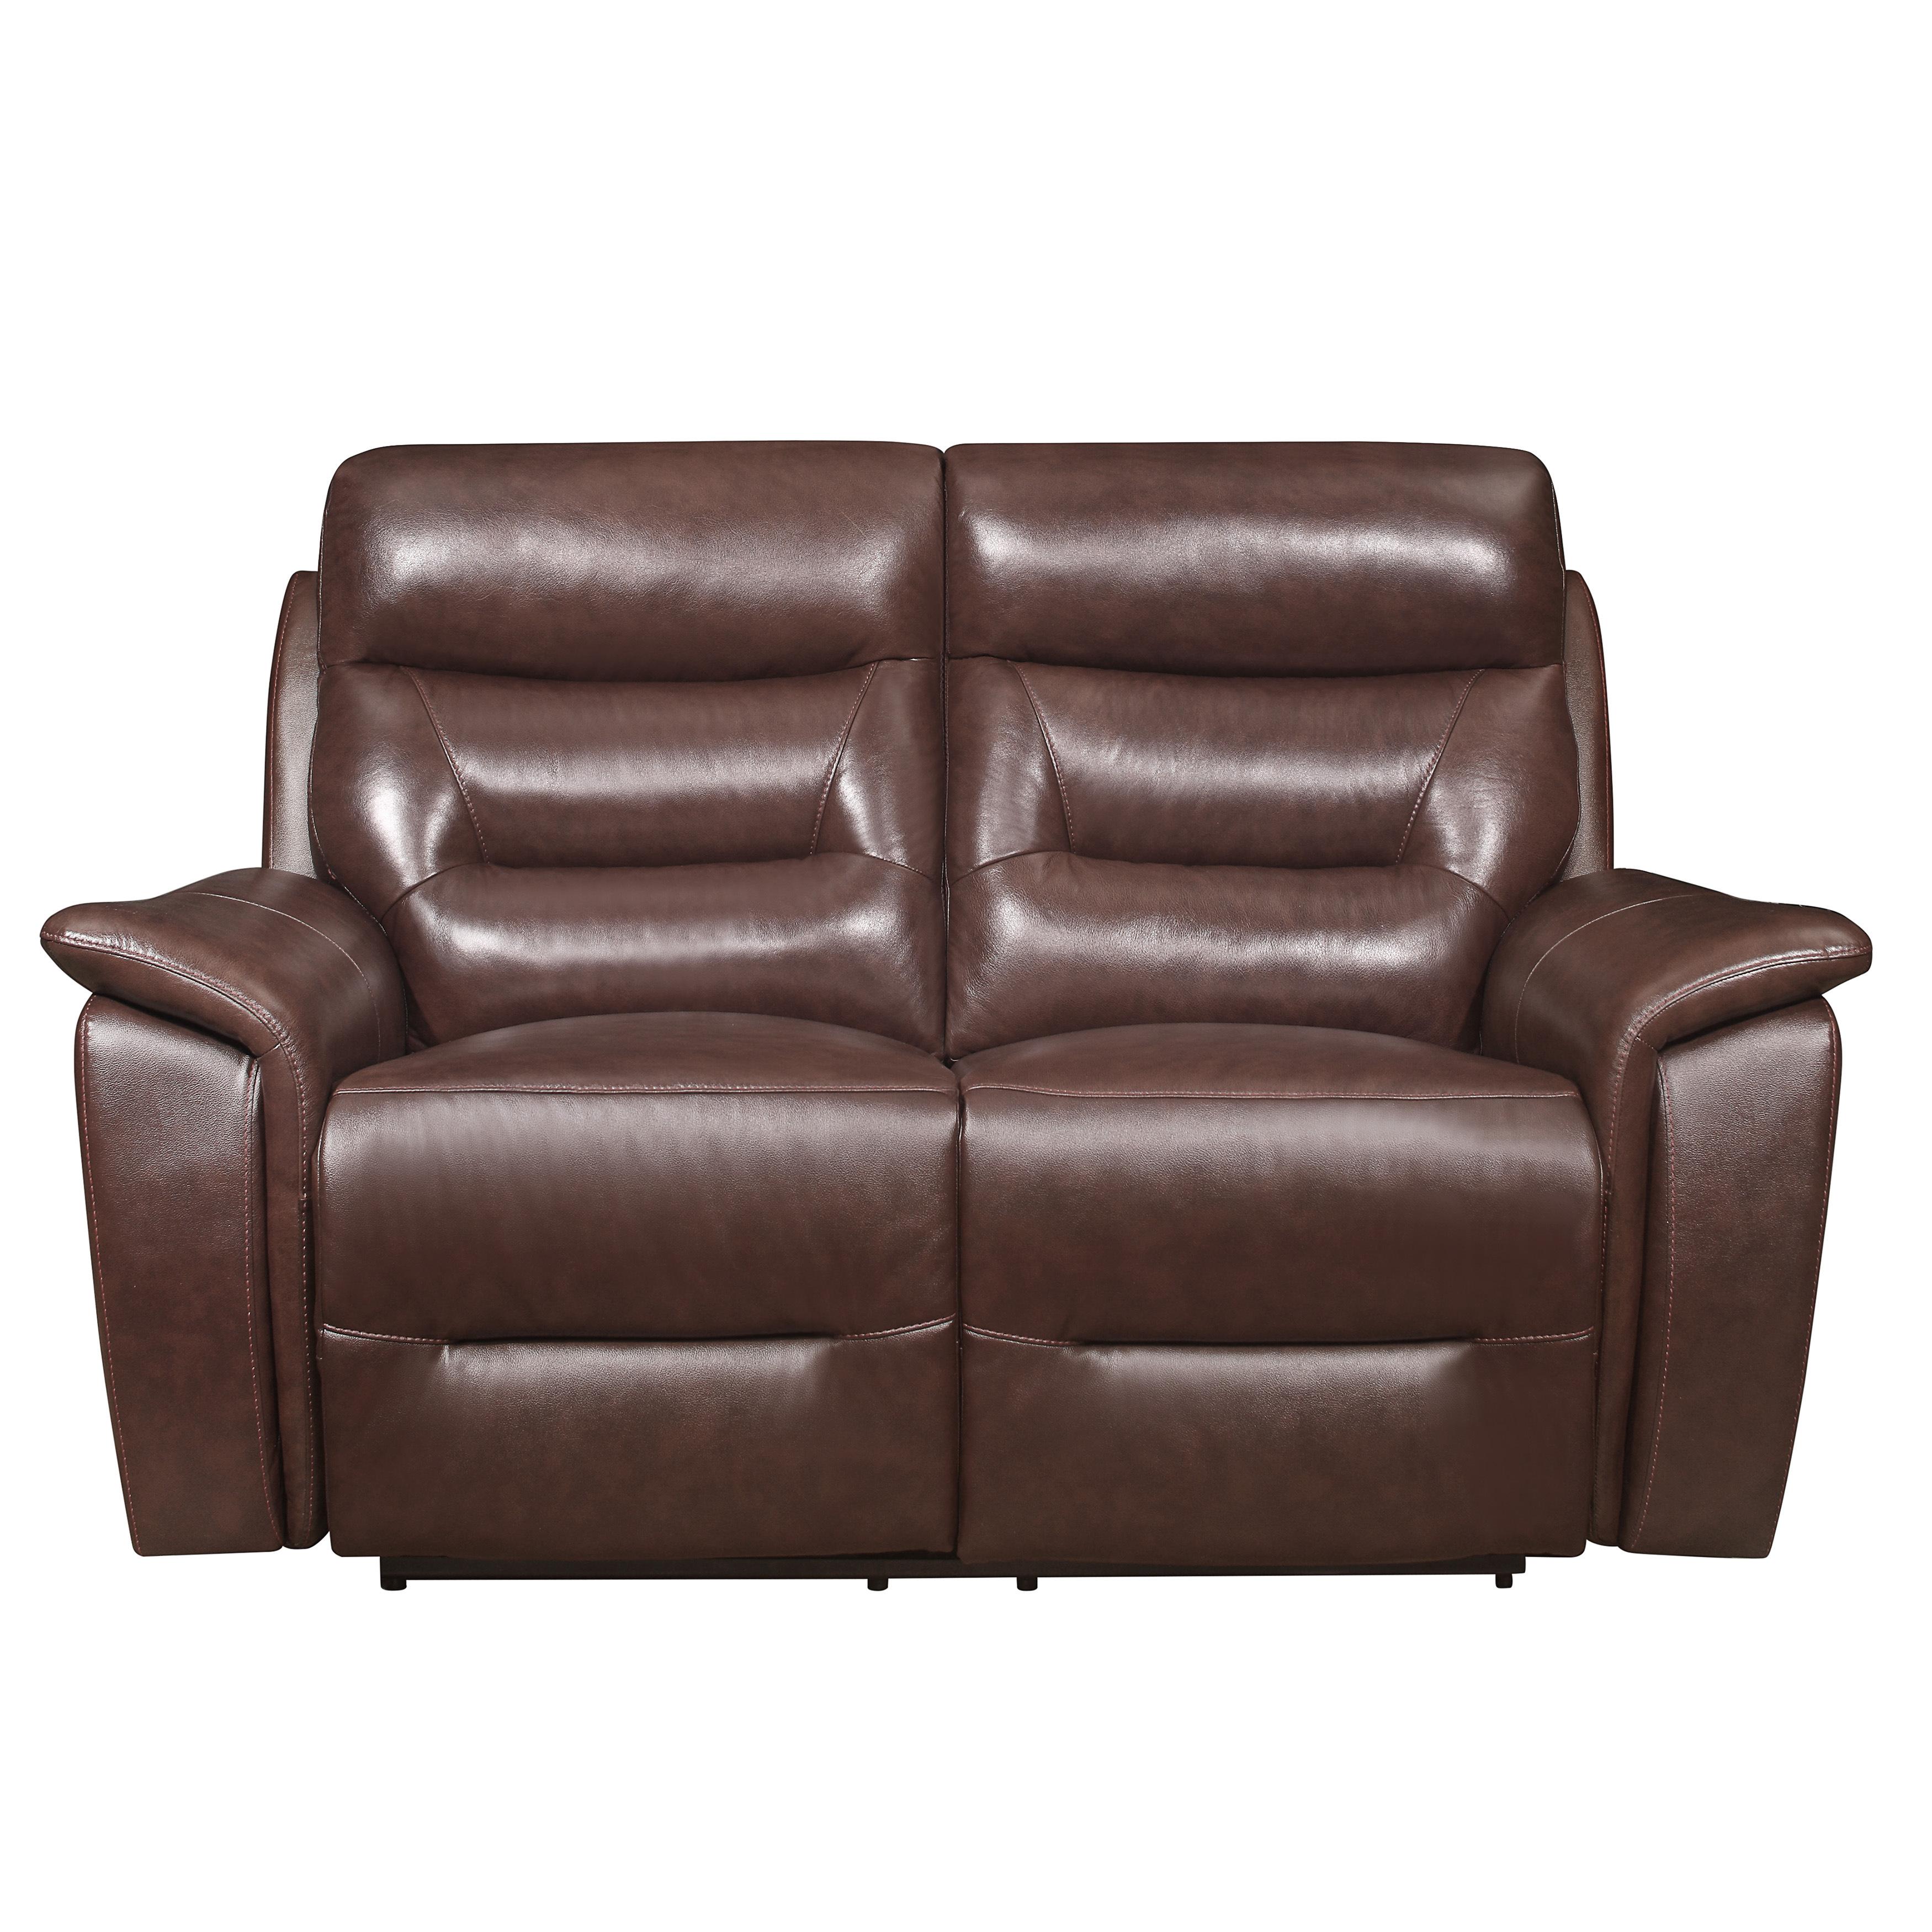 Transitional Power Reclining Loveseat 9445BR-2PWH Armando 9445BR-2PWH in Brown Leather